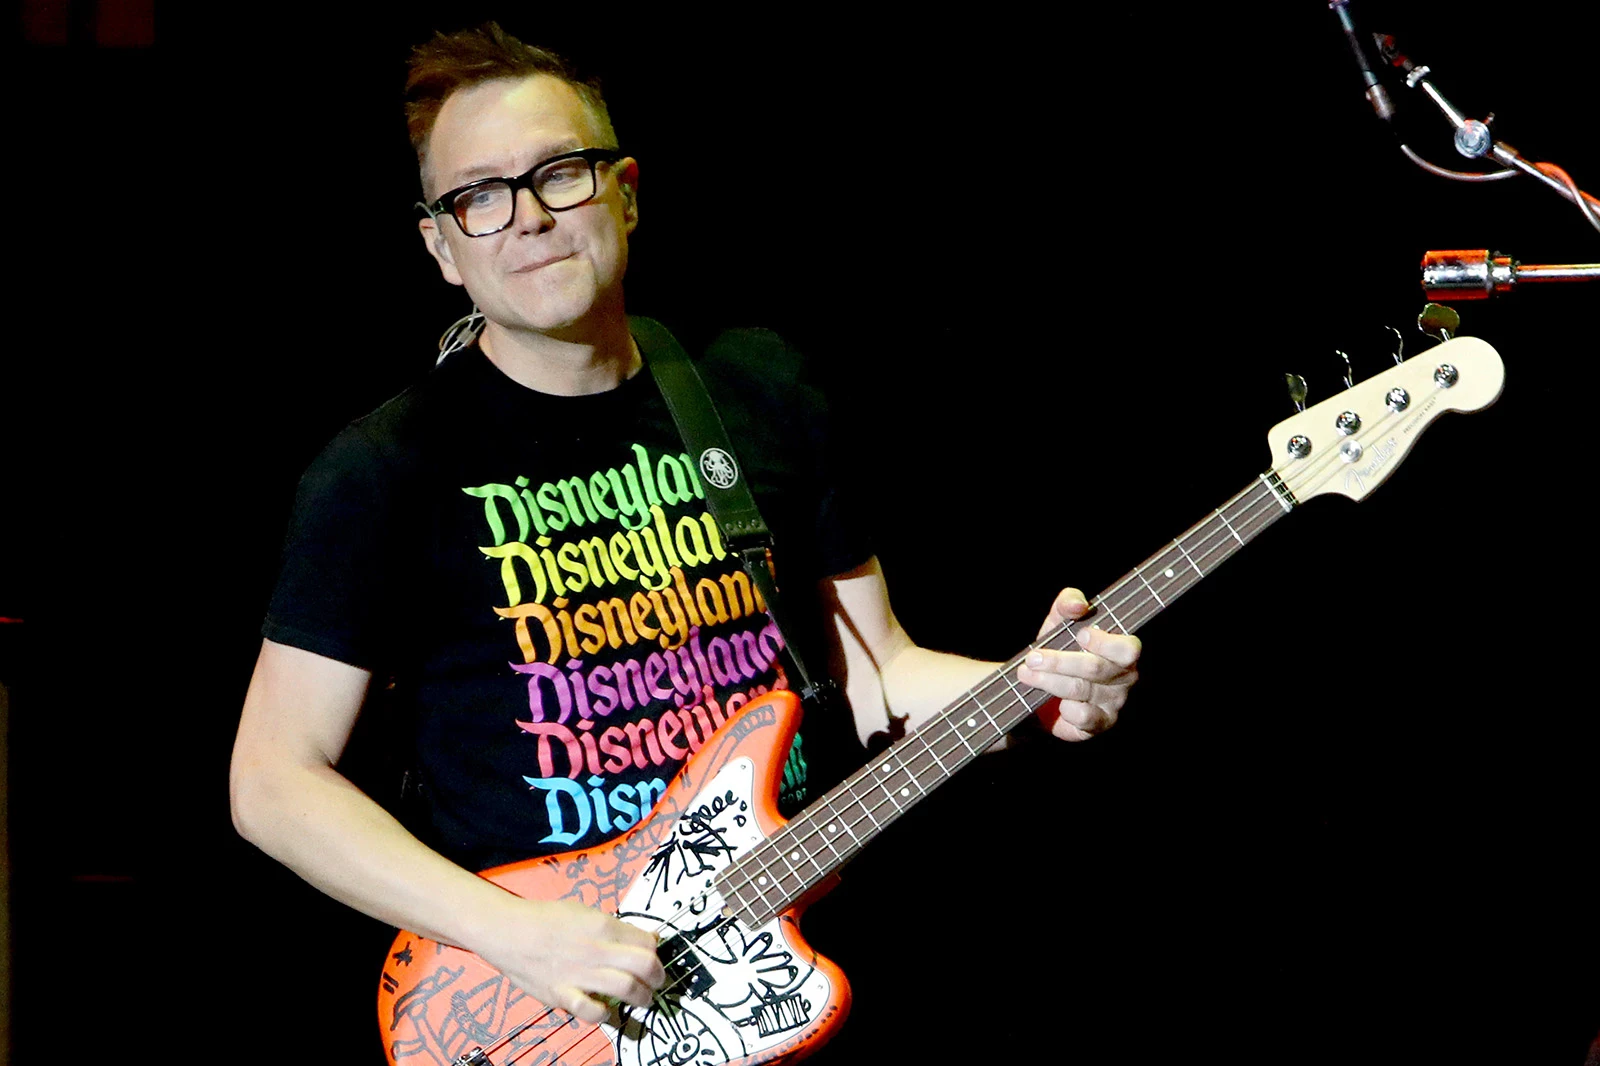 Mark Hoppus Tried to Buy Blink-182 Tickets but Couldnt picture image